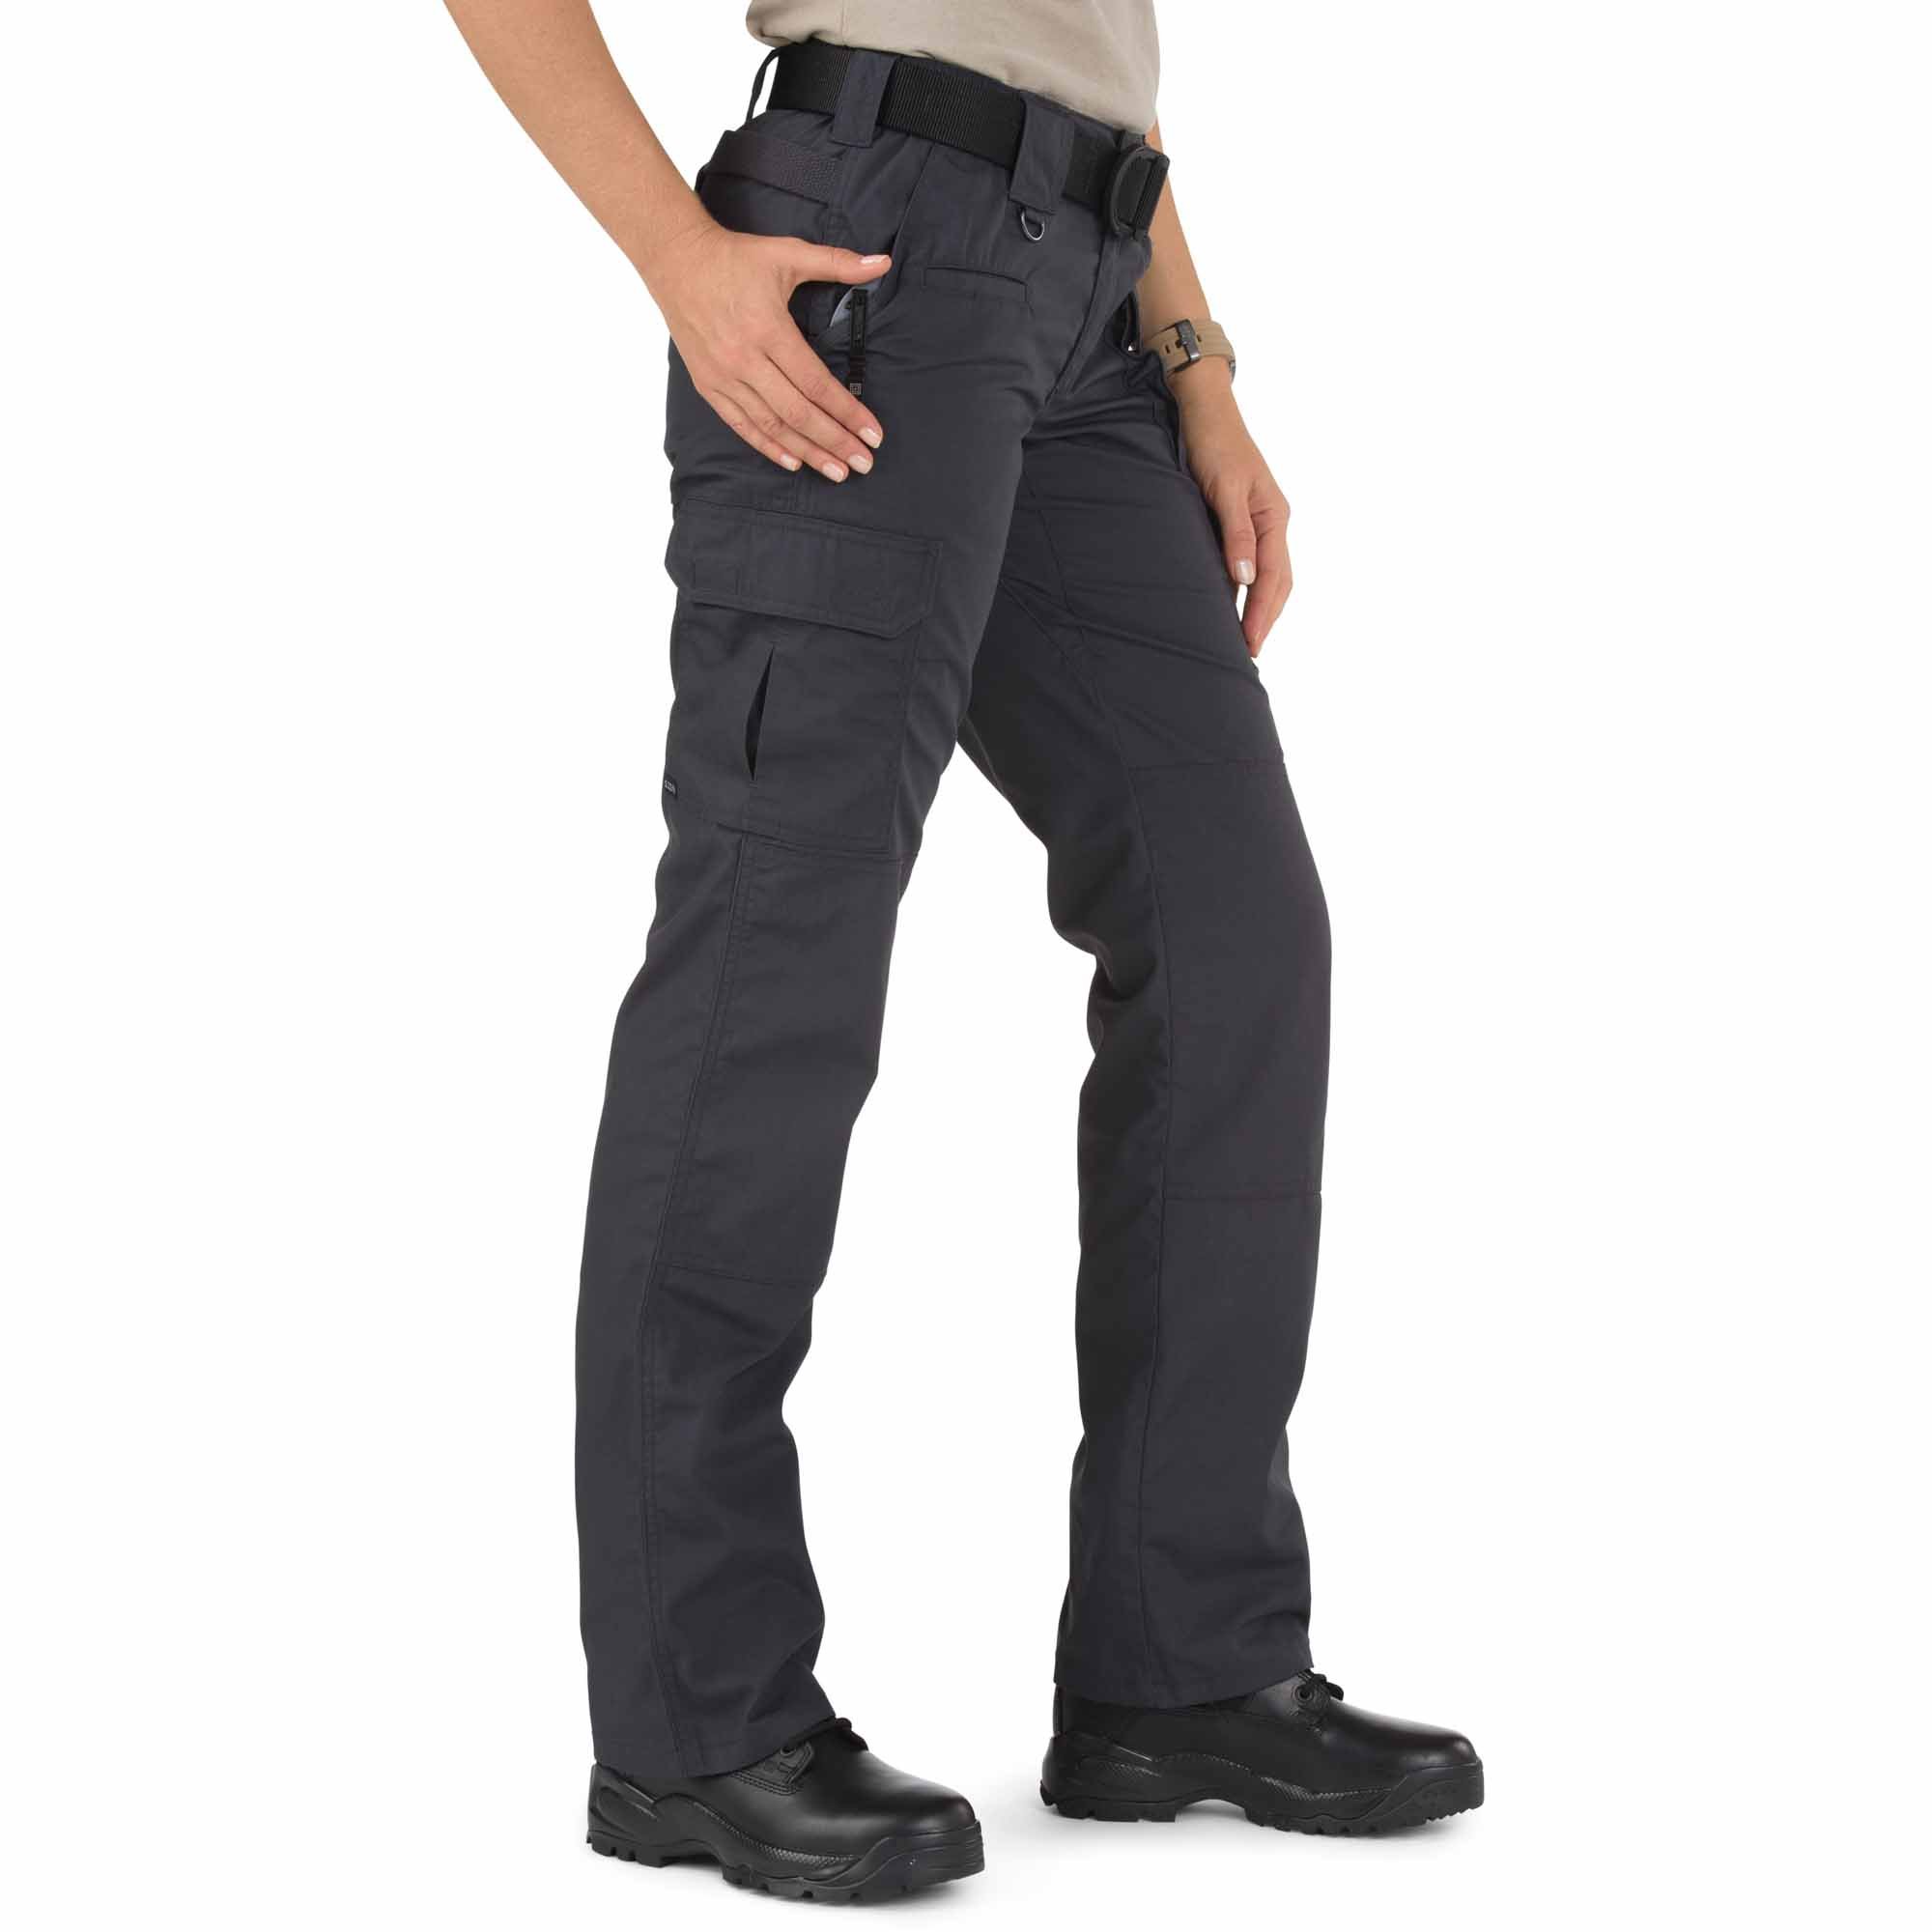 5.11 Women's Taclite Pro Tactical 7 Pocket Cargo Pant, Teflon Treated, Rip and Water Resistant, Style 64360